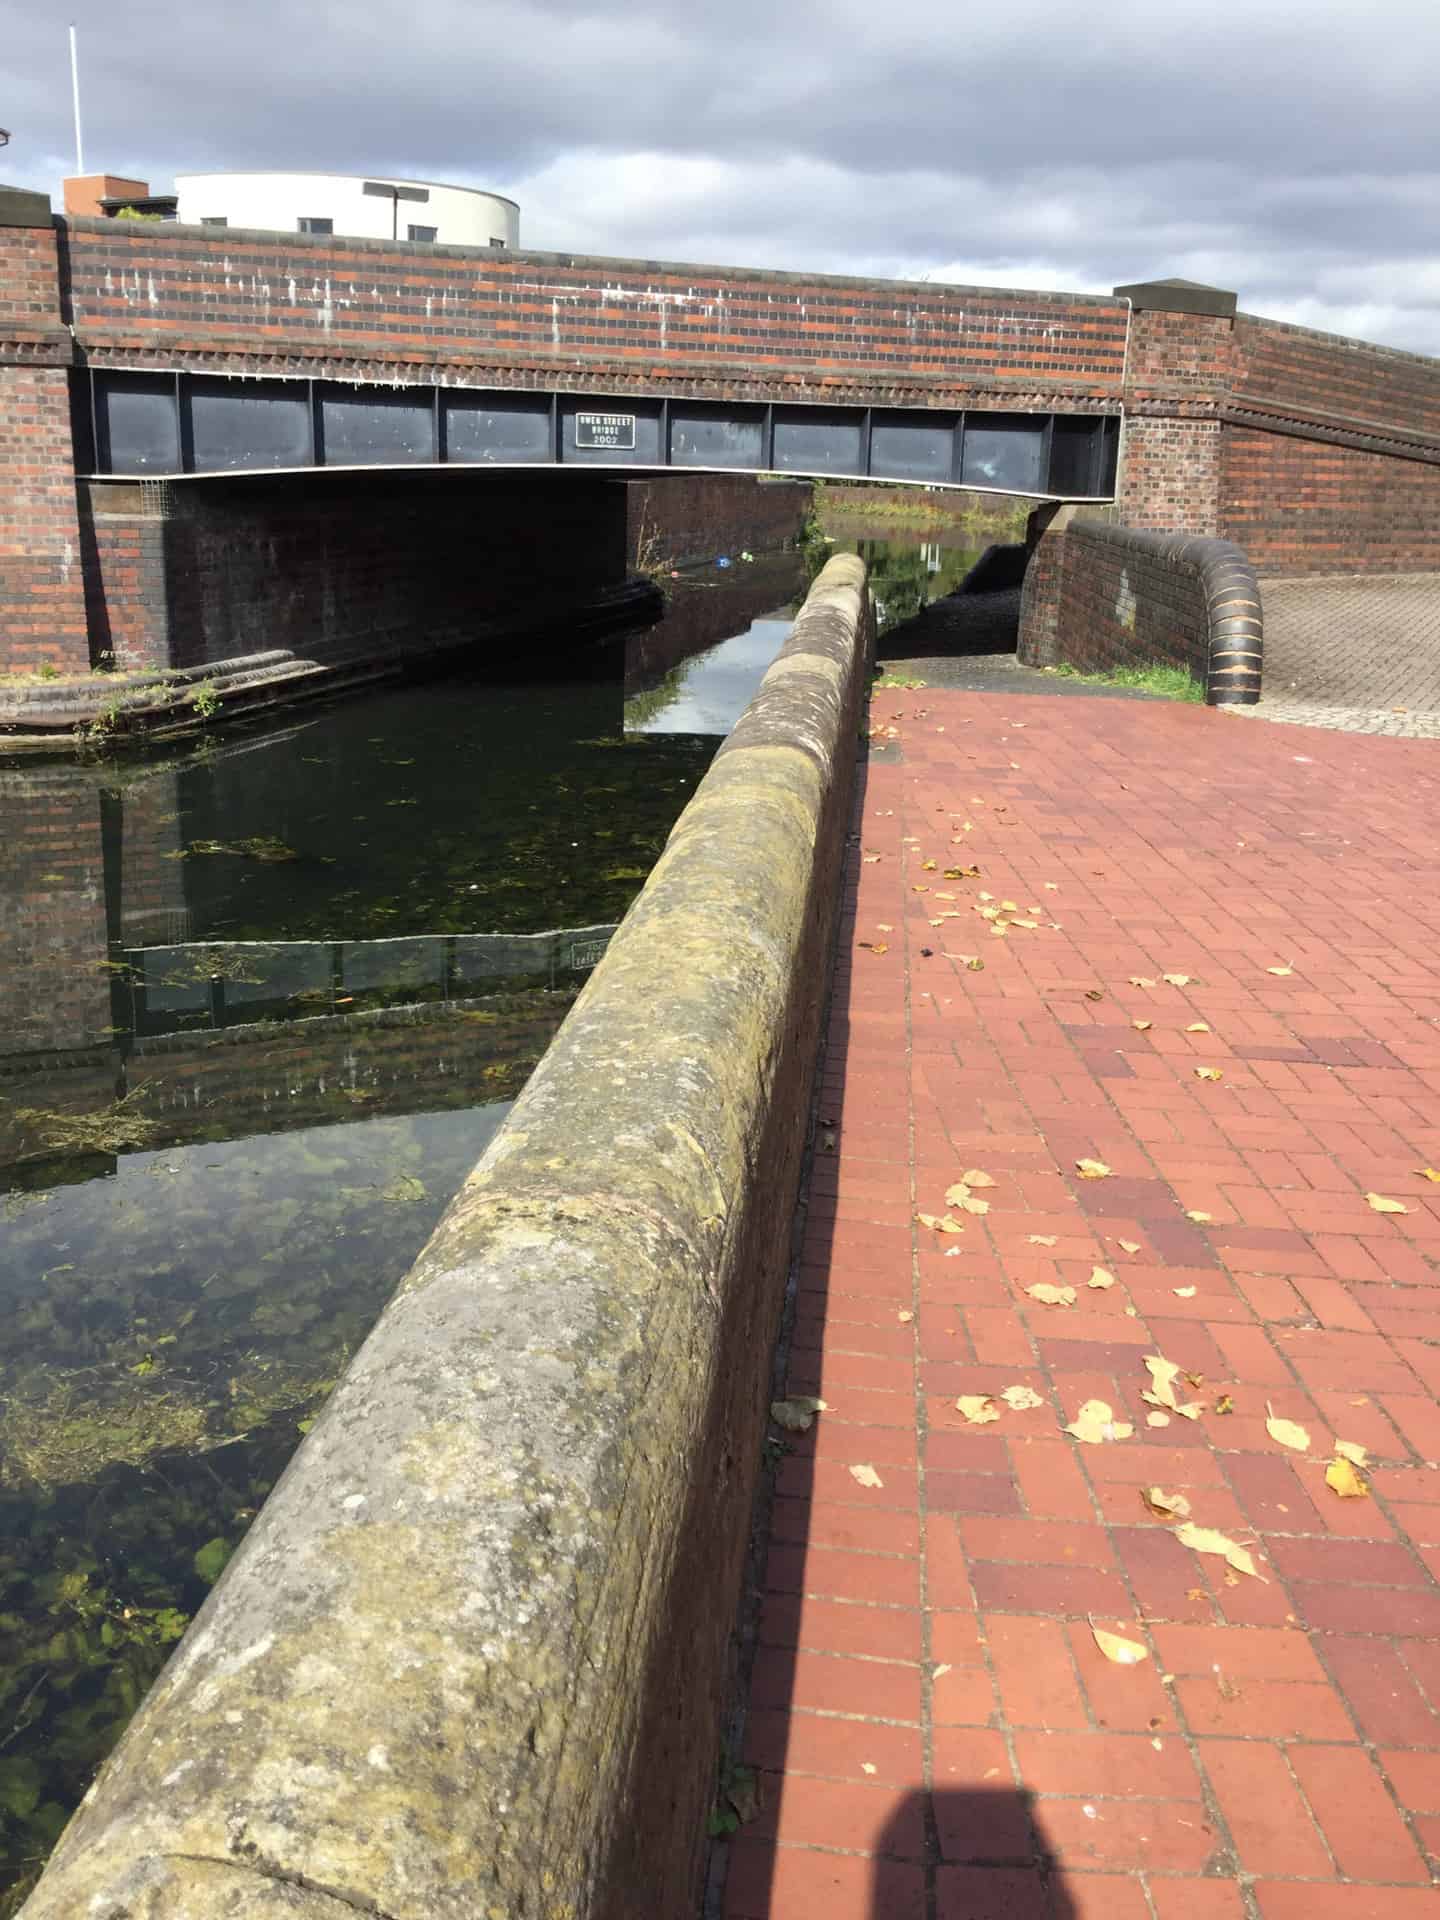 Canal bridge in Tipton photographed by Wendy, also a place of her childhood 2019